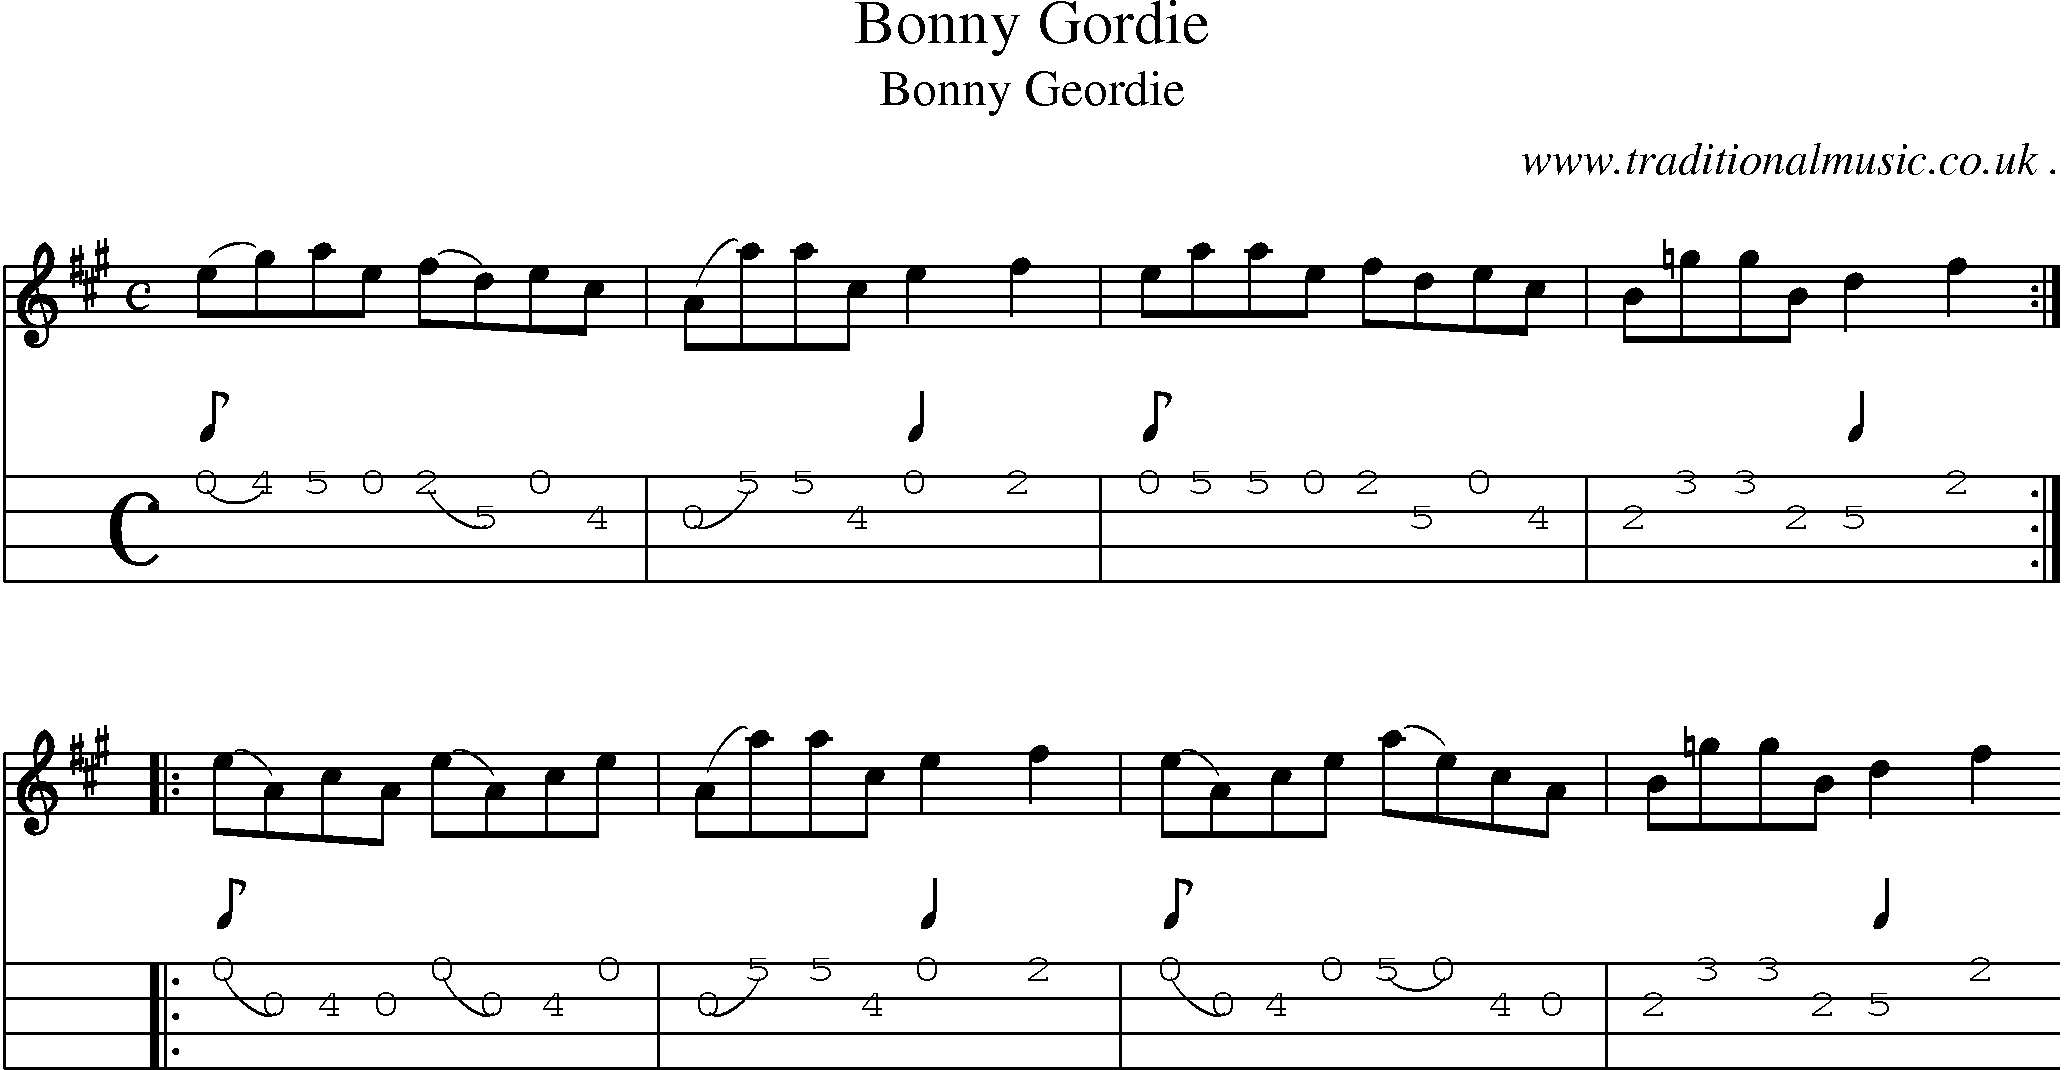 Sheet-Music and Mandolin Tabs for Bonny Gordie